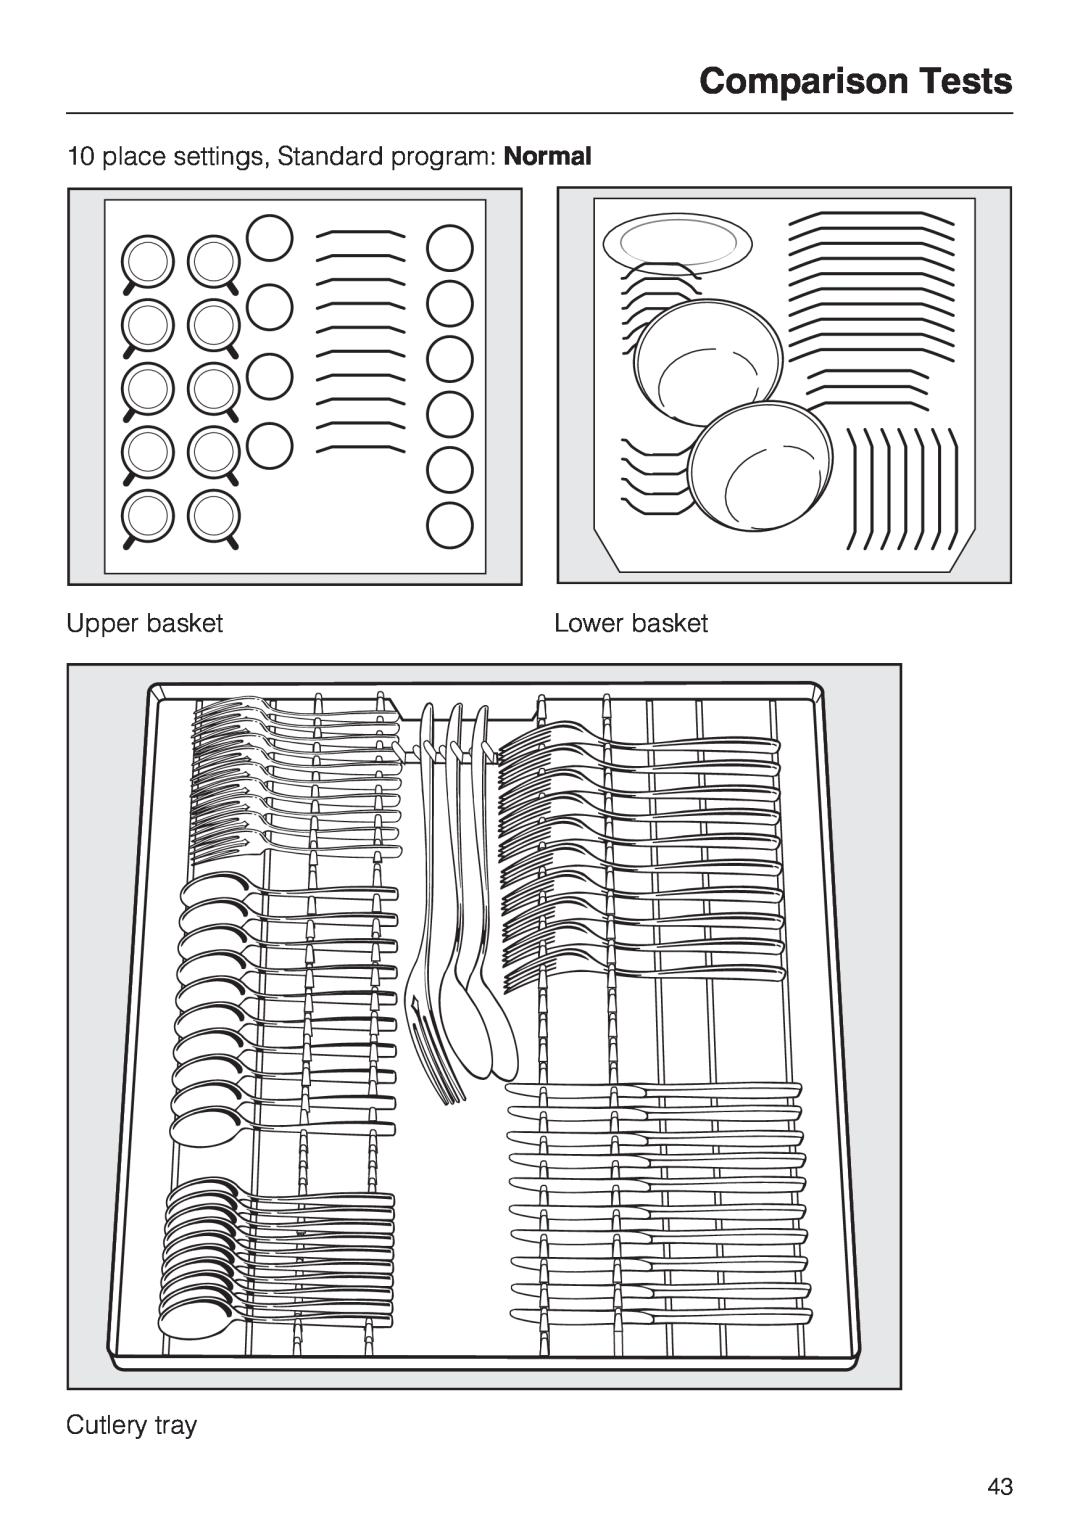 Miele G 1472, G 2472 Comparison Tests, place settings, Standard program Normal, Upper basket, Lower basket, Cutlery tray 